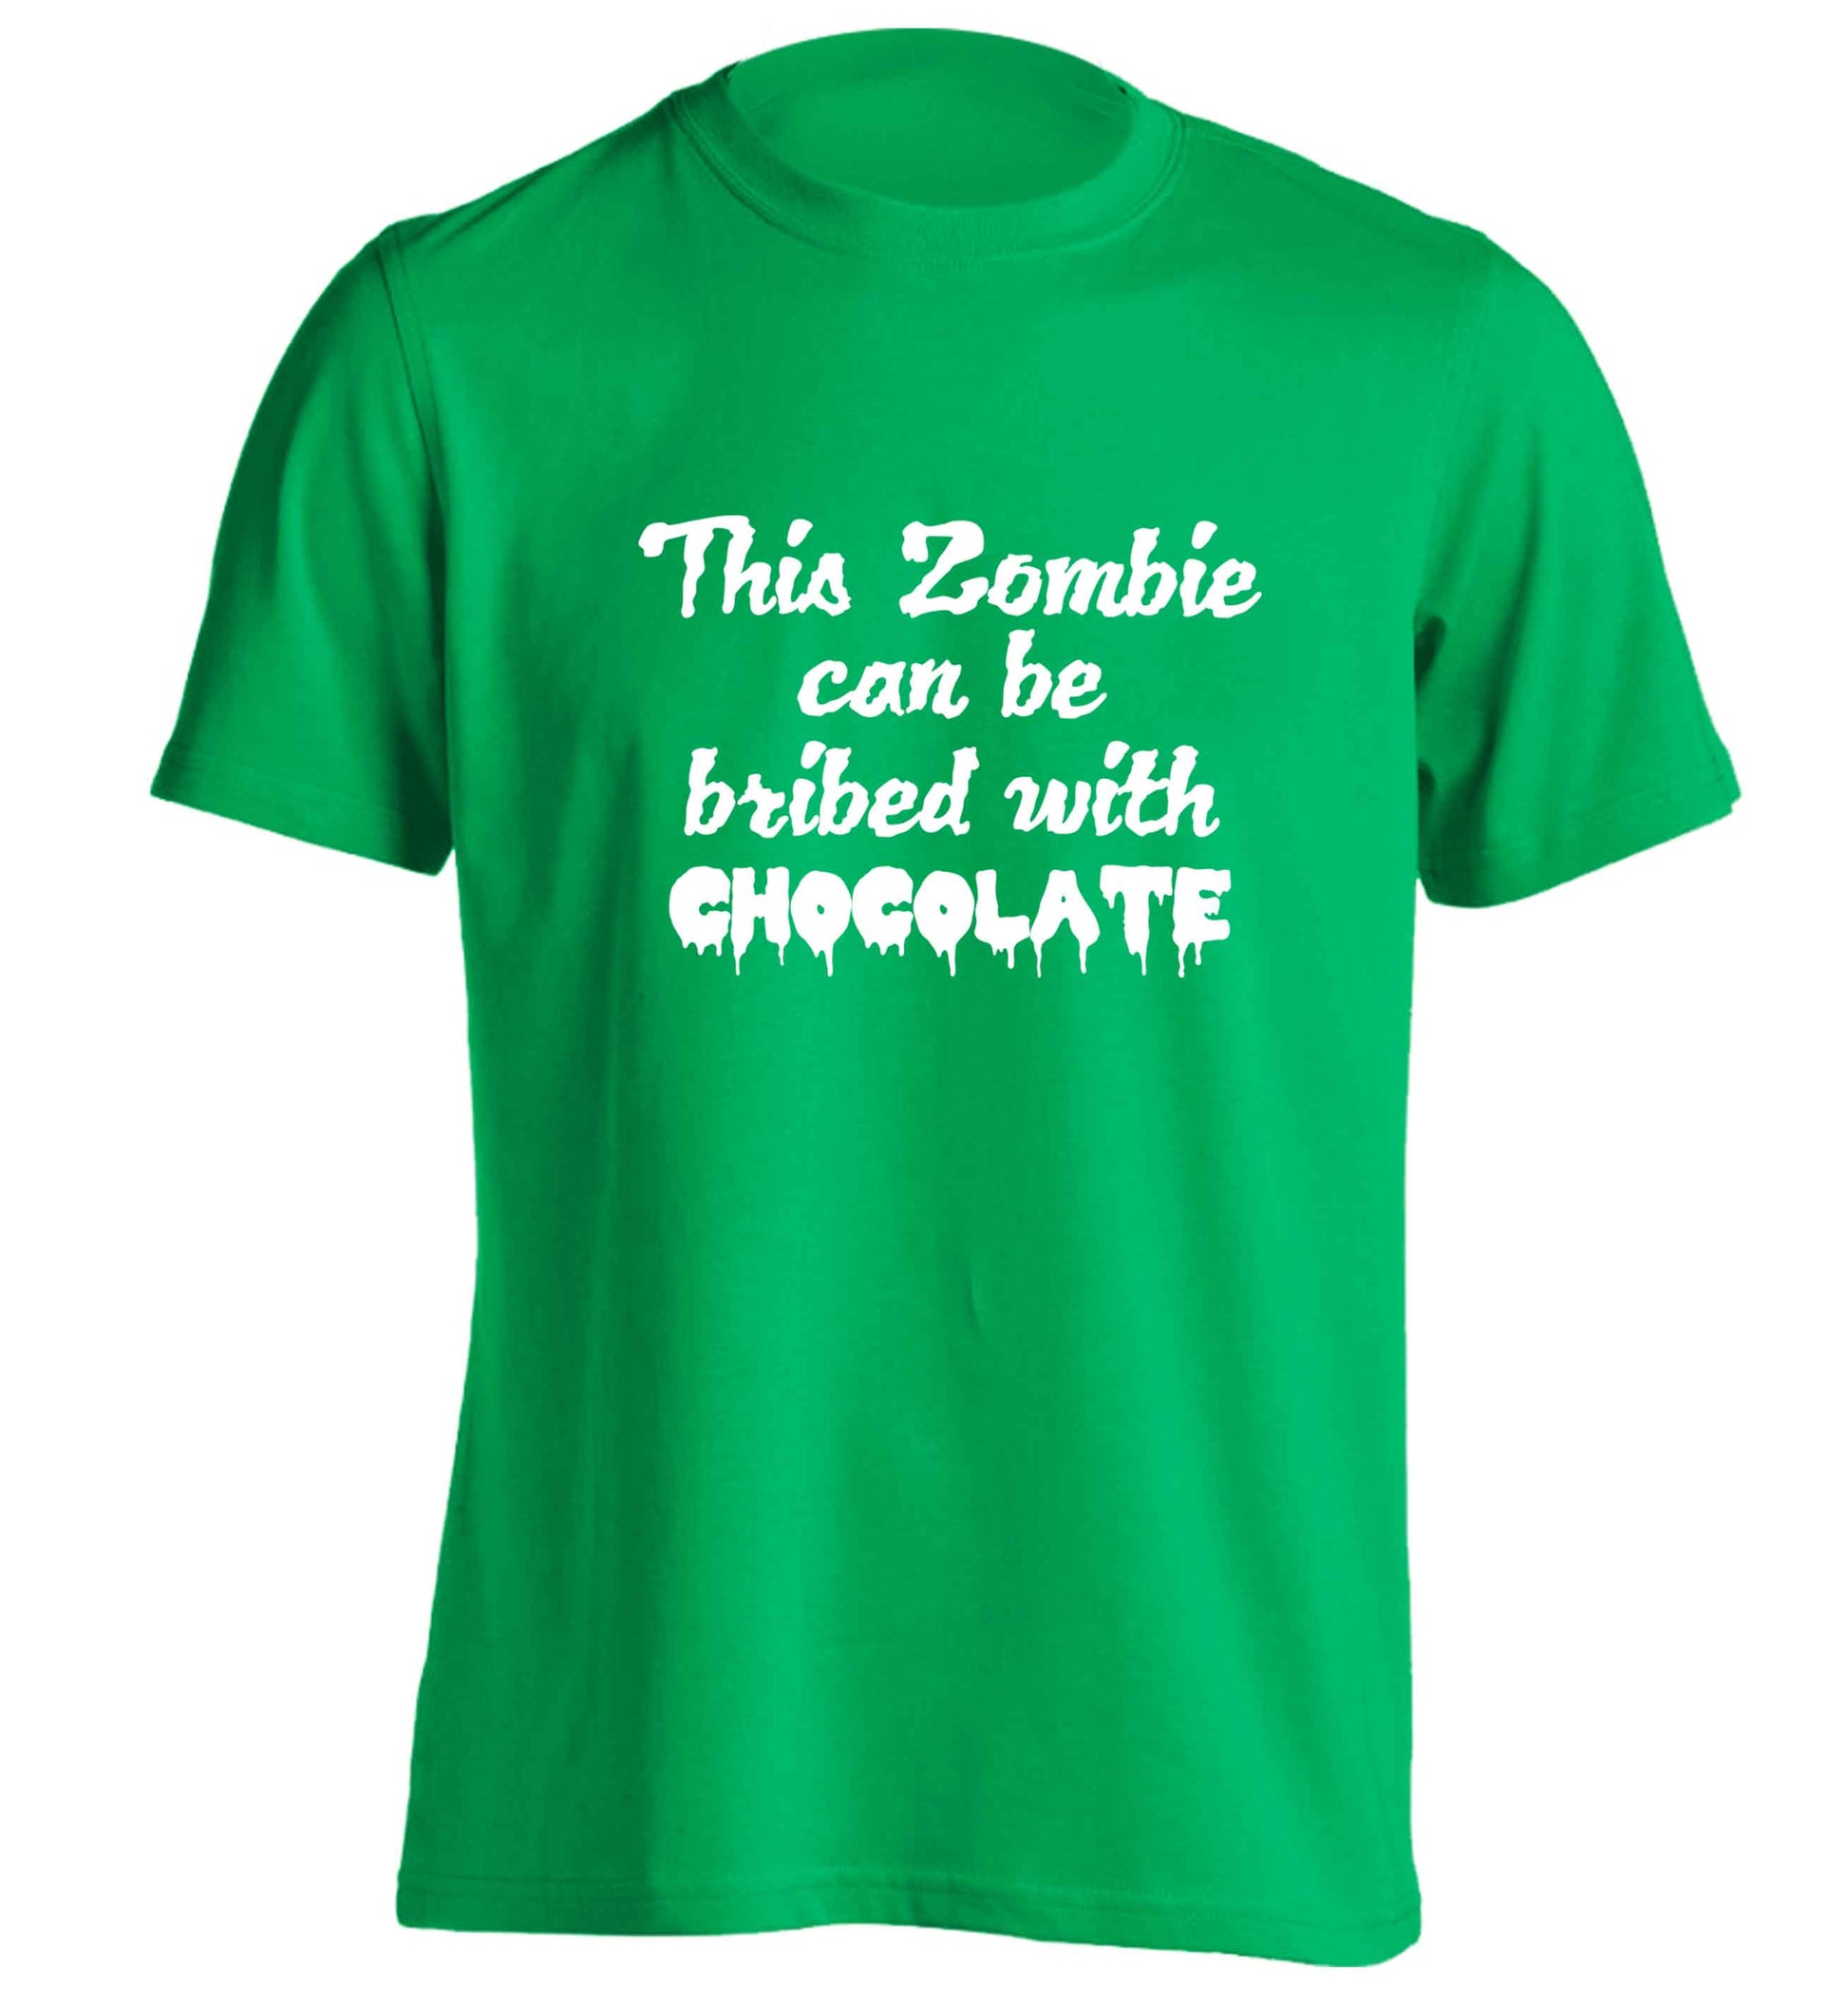 This zombie can be bribed with chocolate adults unisex green Tshirt 2XL